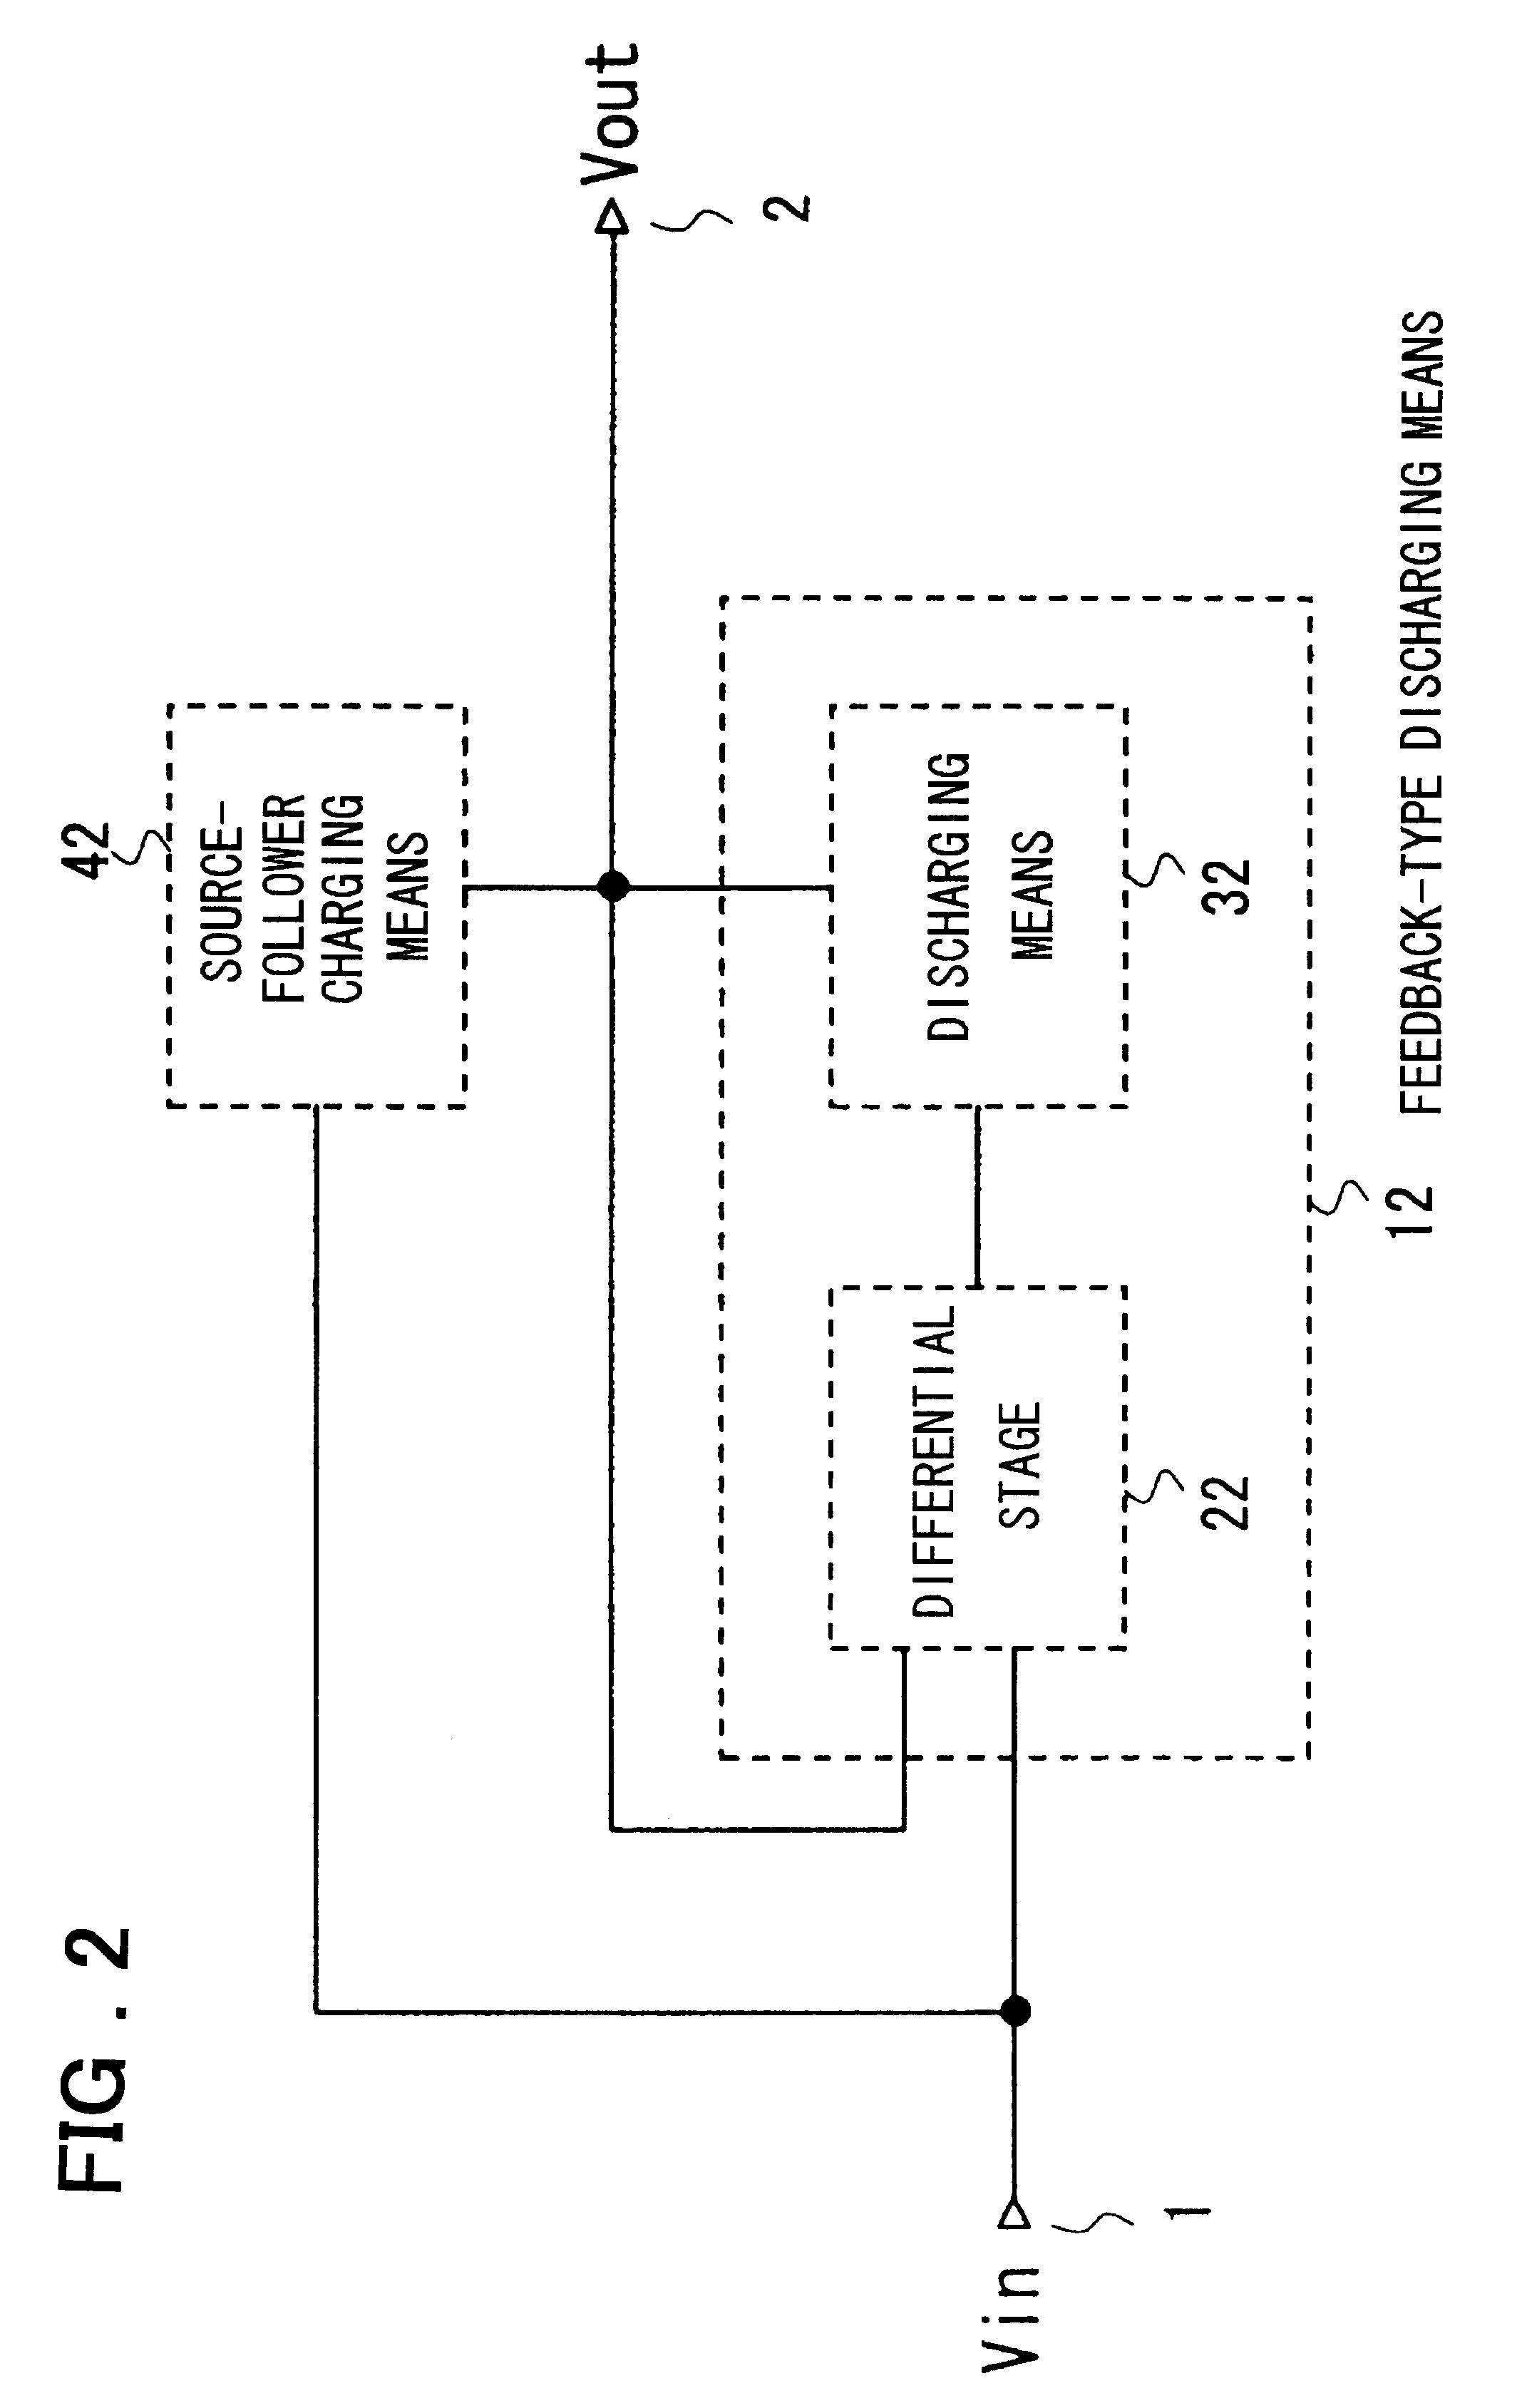 Feedback-type amplifier circuit and driver circuit